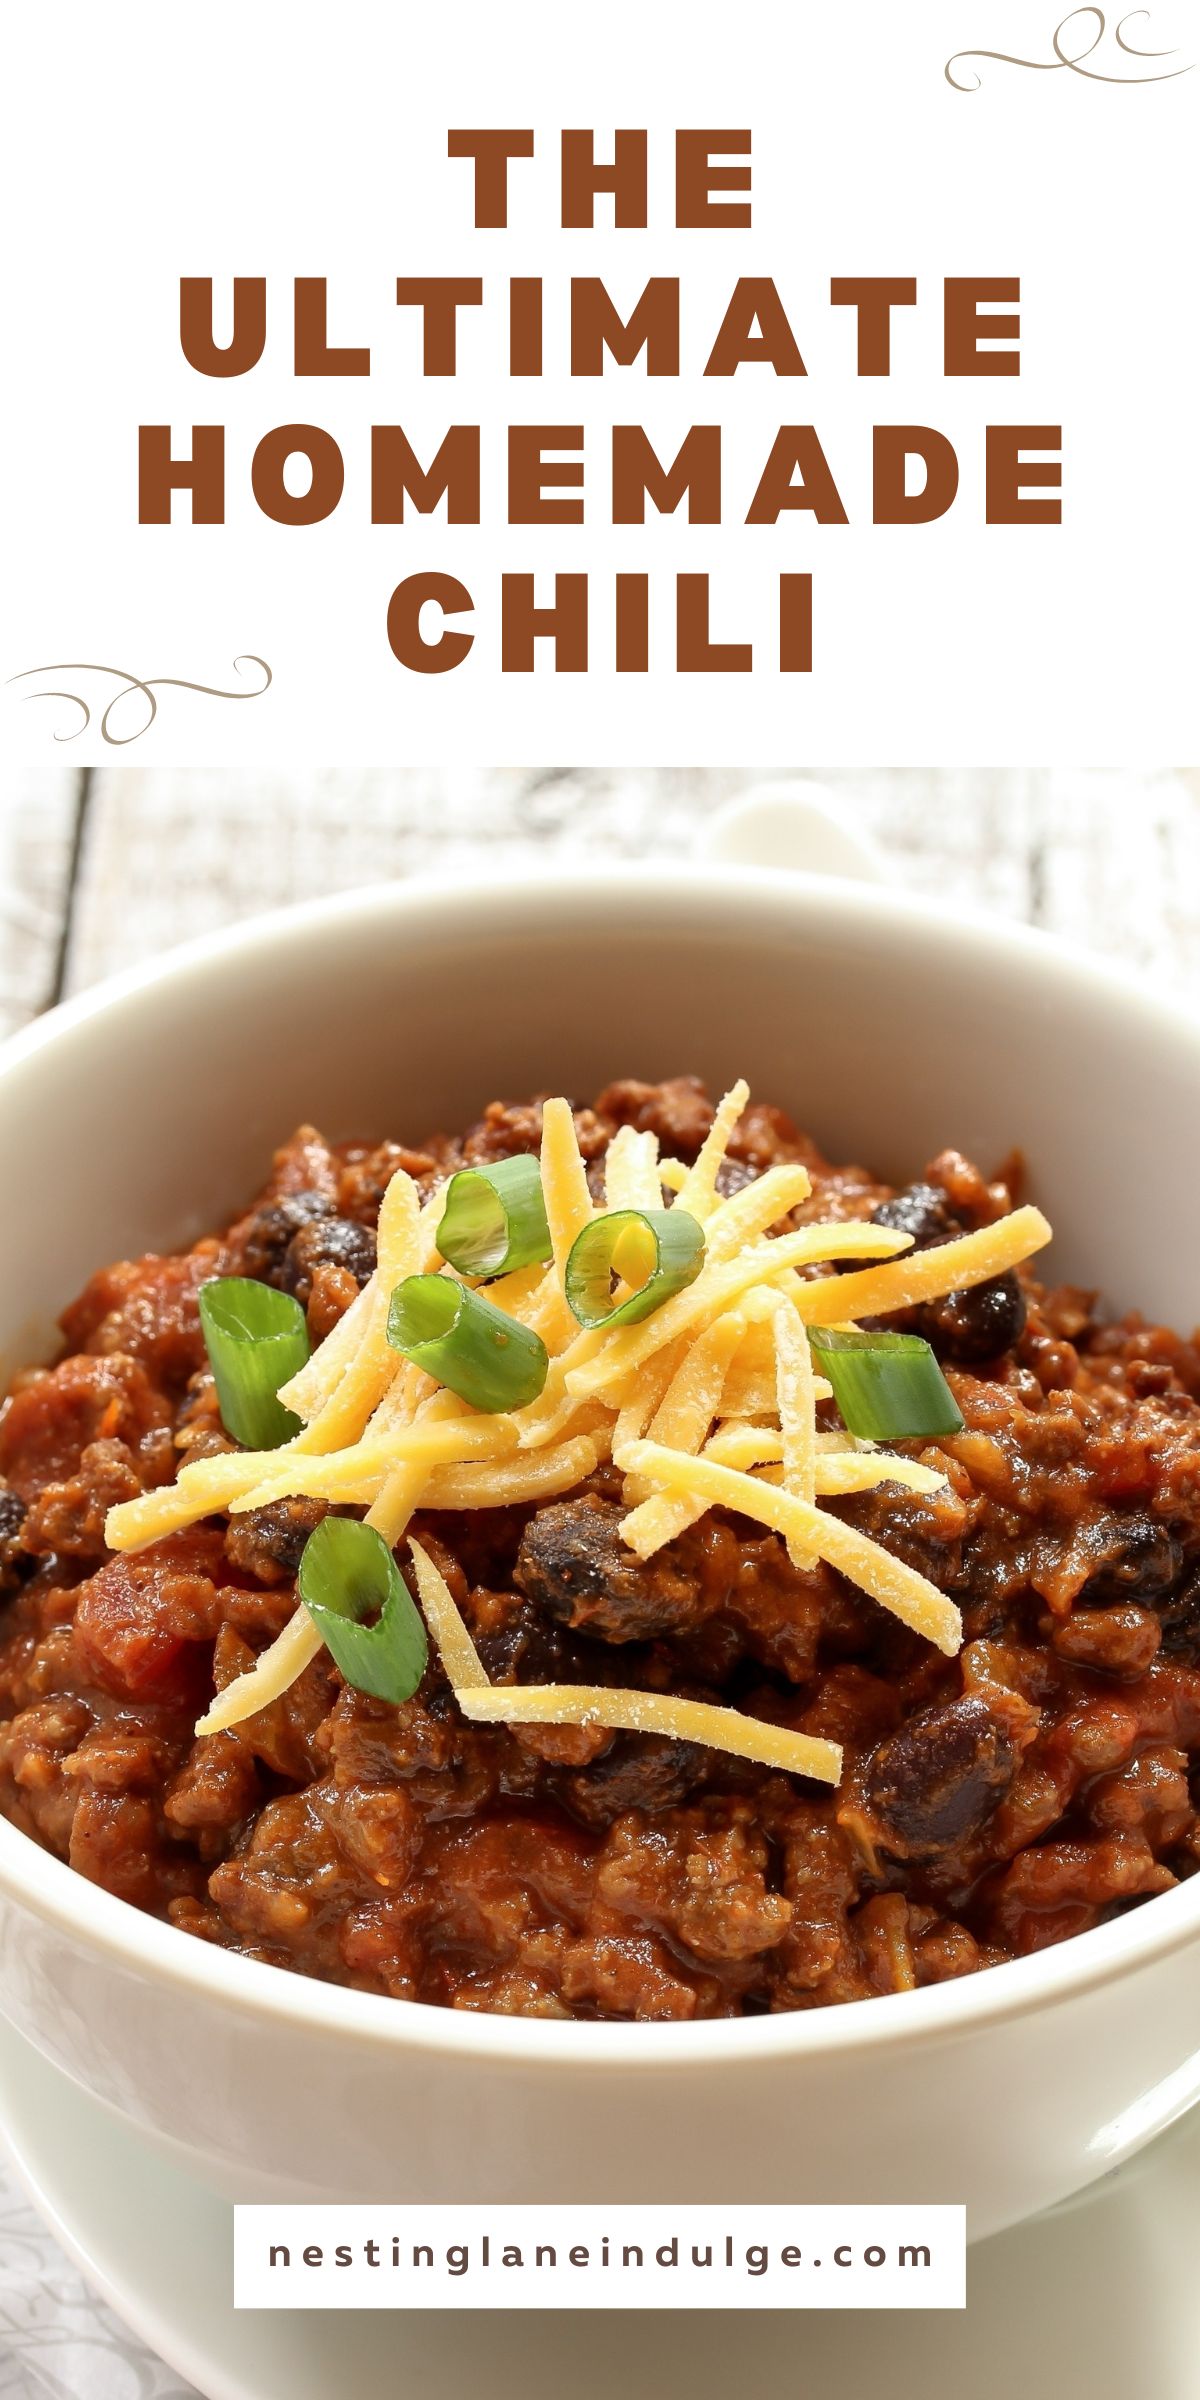 Promotional graphic for The Ultimate Homemade Chili with the title in large, brown font at the top and nestinglaneindulge.com at the bottom. The background is a crisp white with a subtle scroll design at the top and bottom.